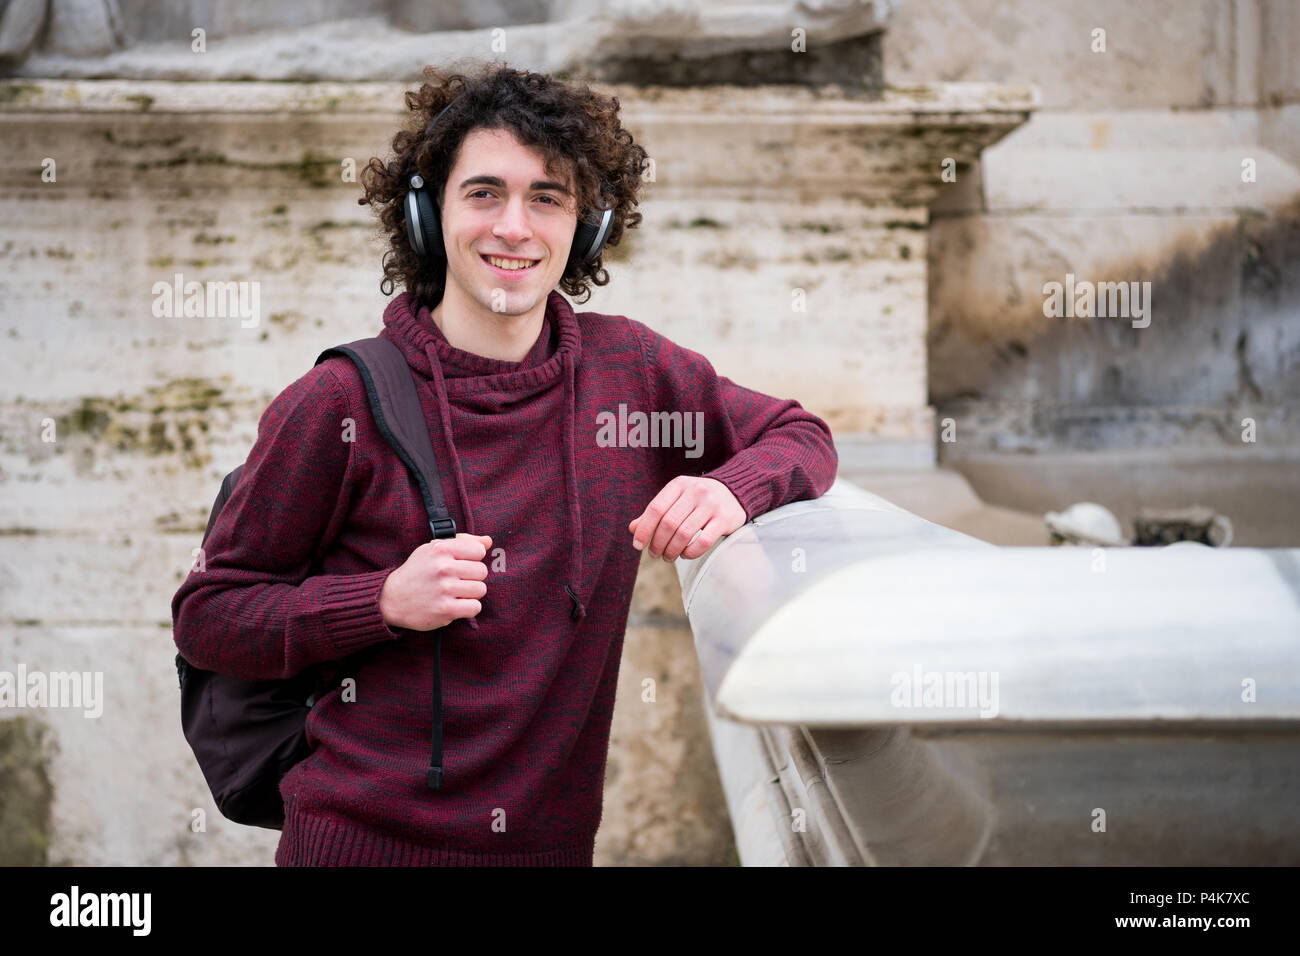 Handsome young man with curly hair and headphones on his head listening the music Stock Photo